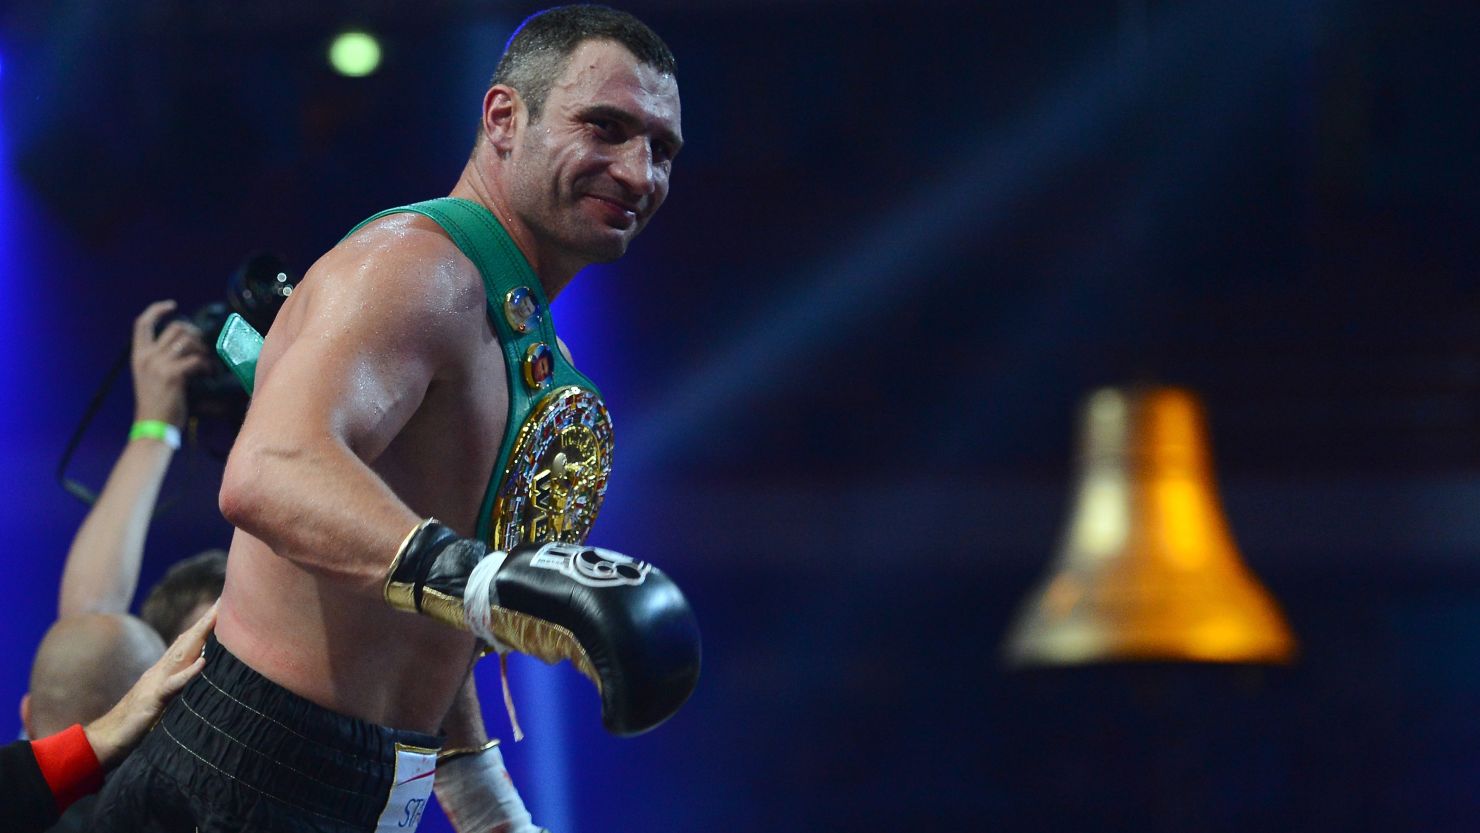 Vitali Klitschko celebrates after winning the WBC-heavy weight title in 2012 in Moscow, Russia.